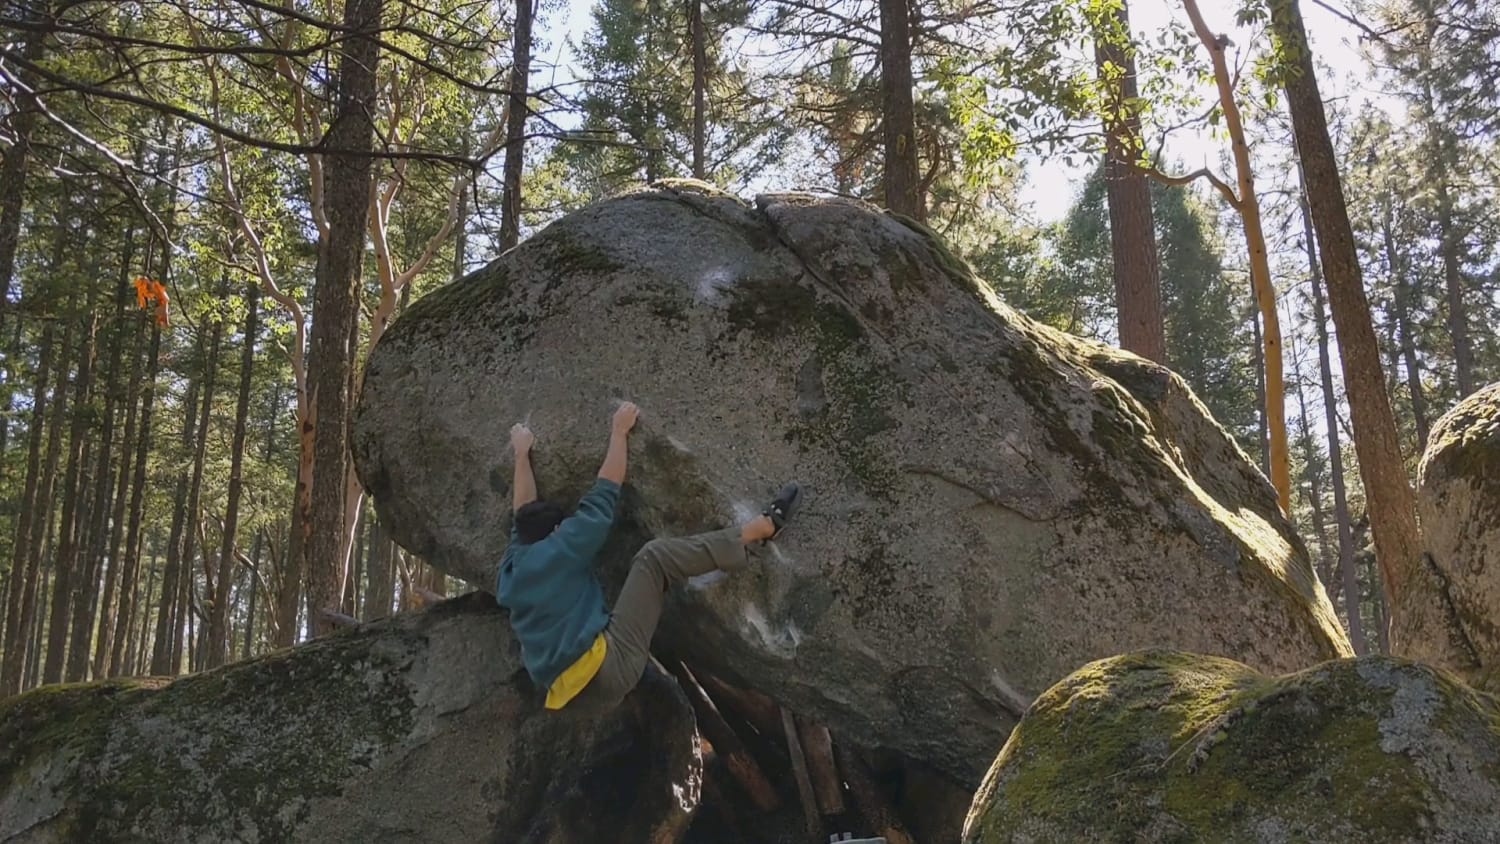 A fun one from Southern Oregon.